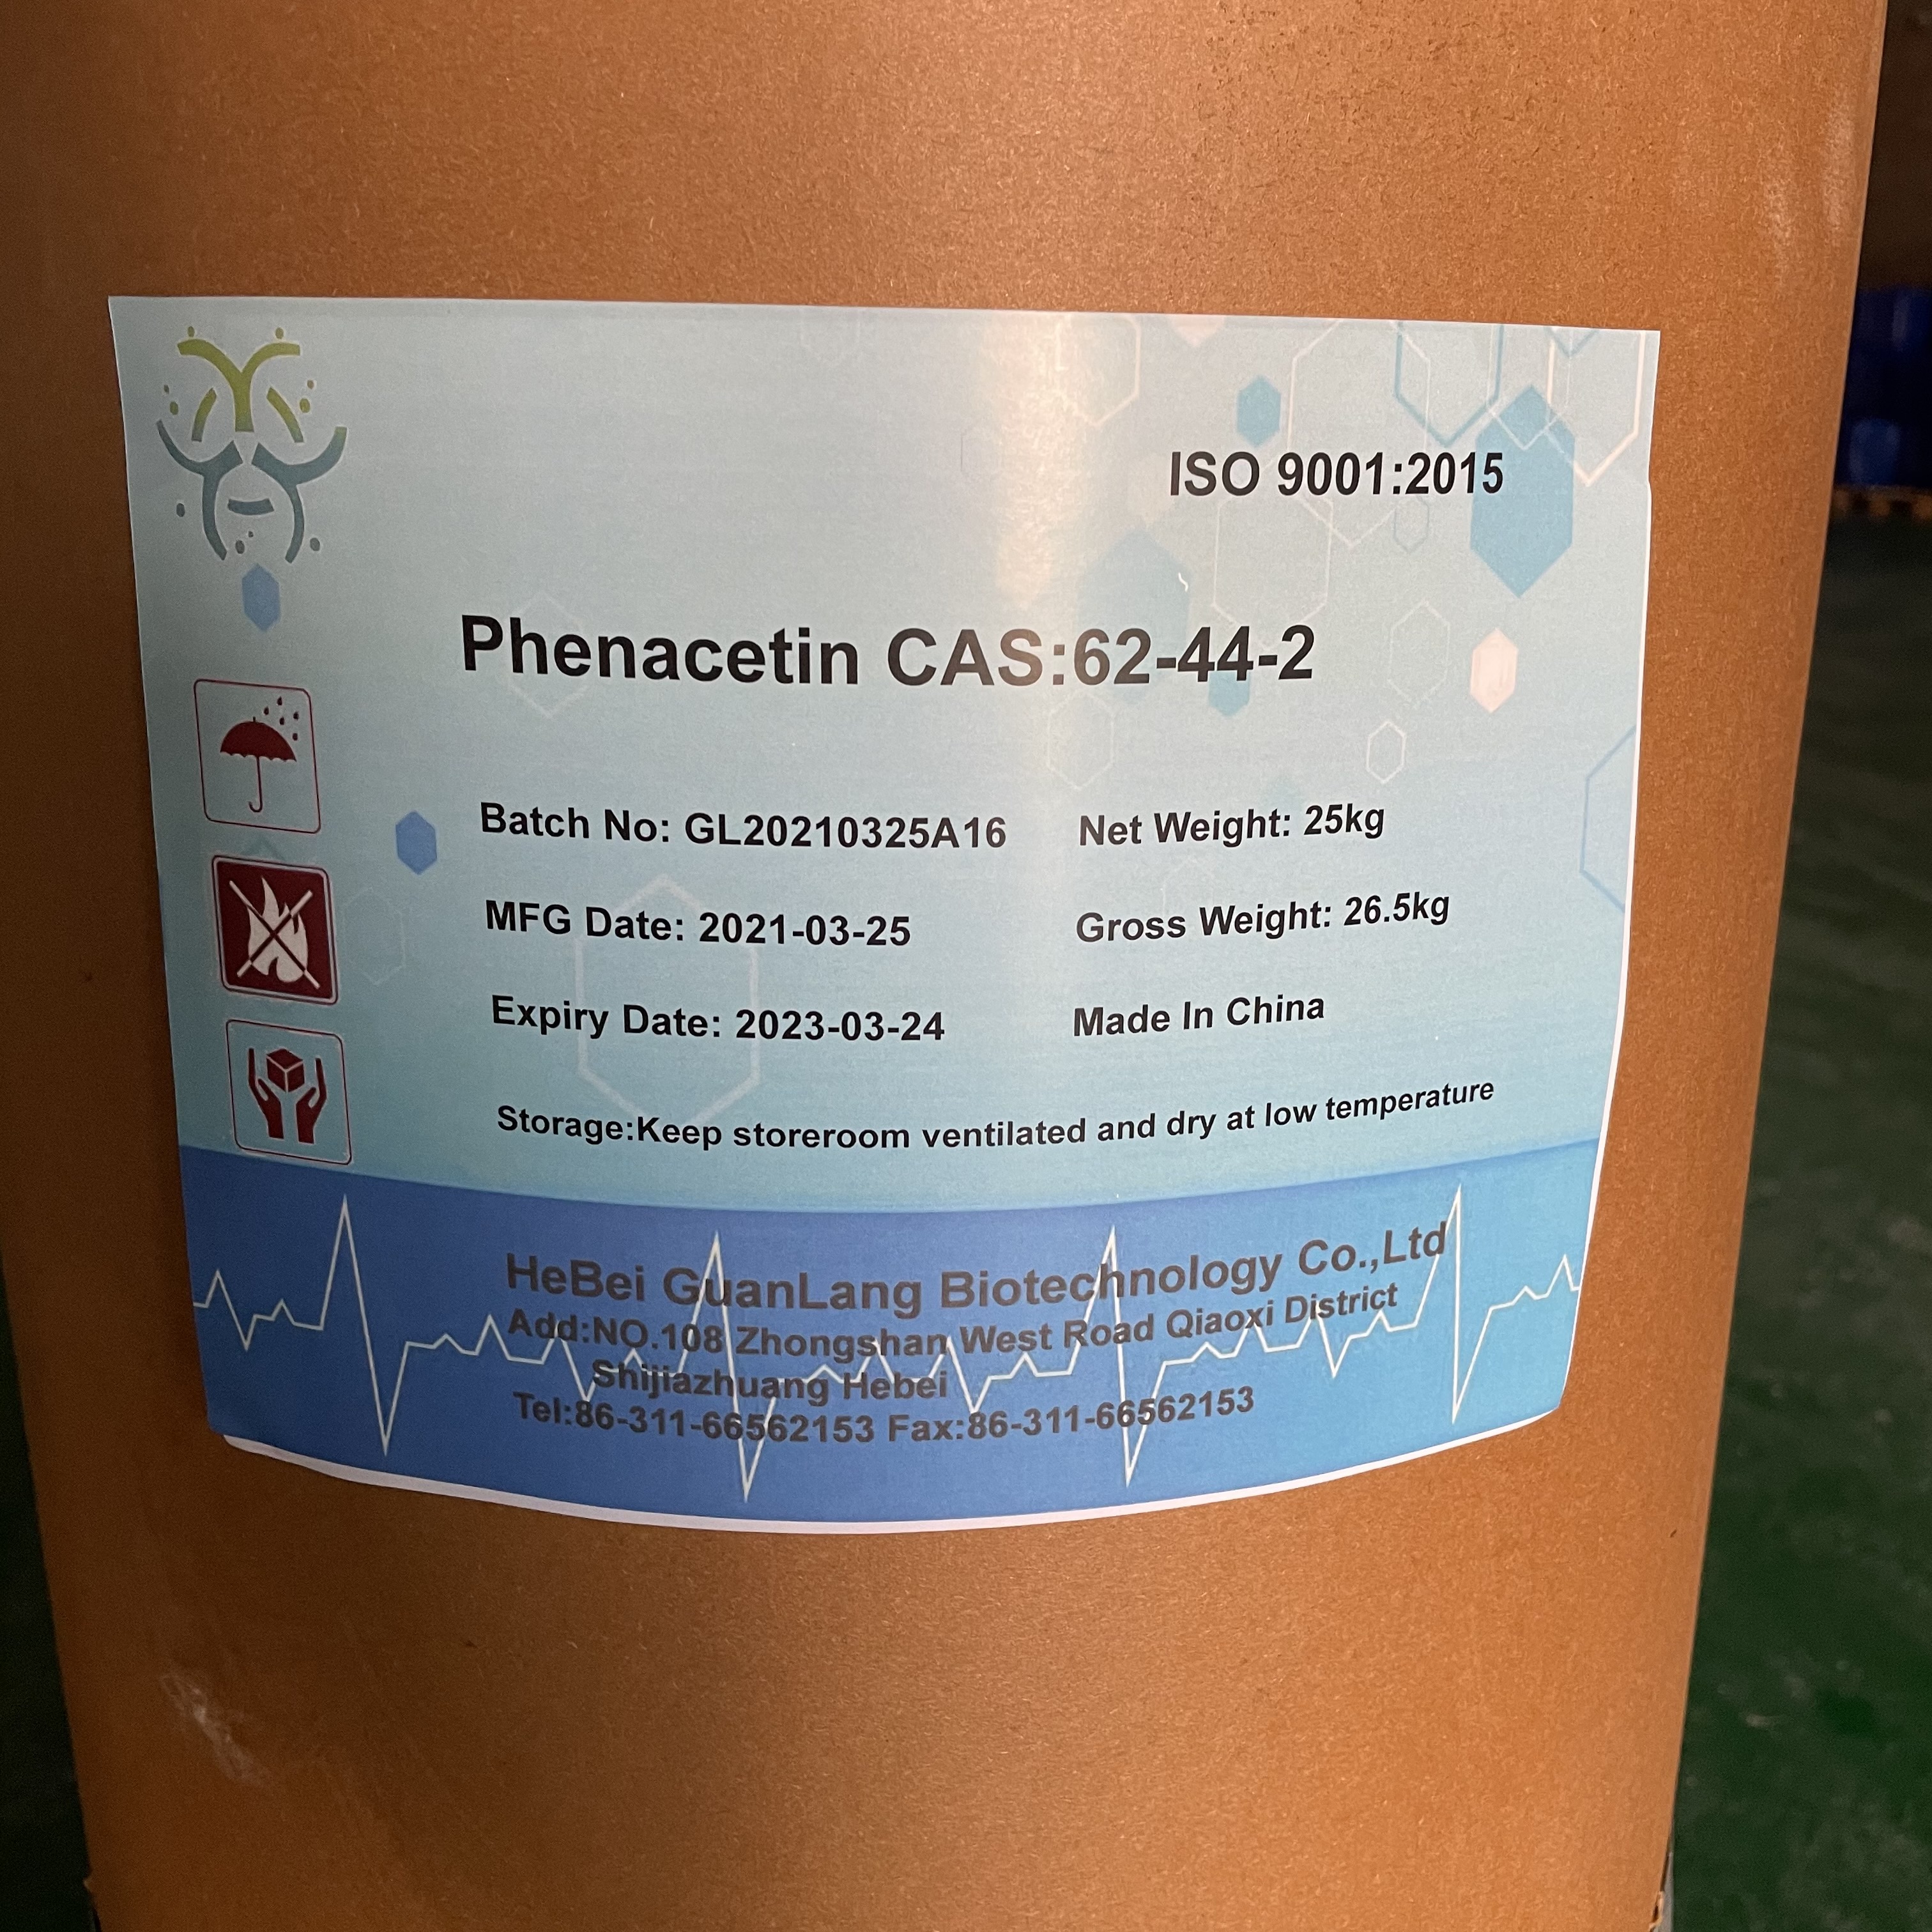 Wholesale Price Methylamine Hcl - Phenacetin supplier in china free sample available – Guanlang